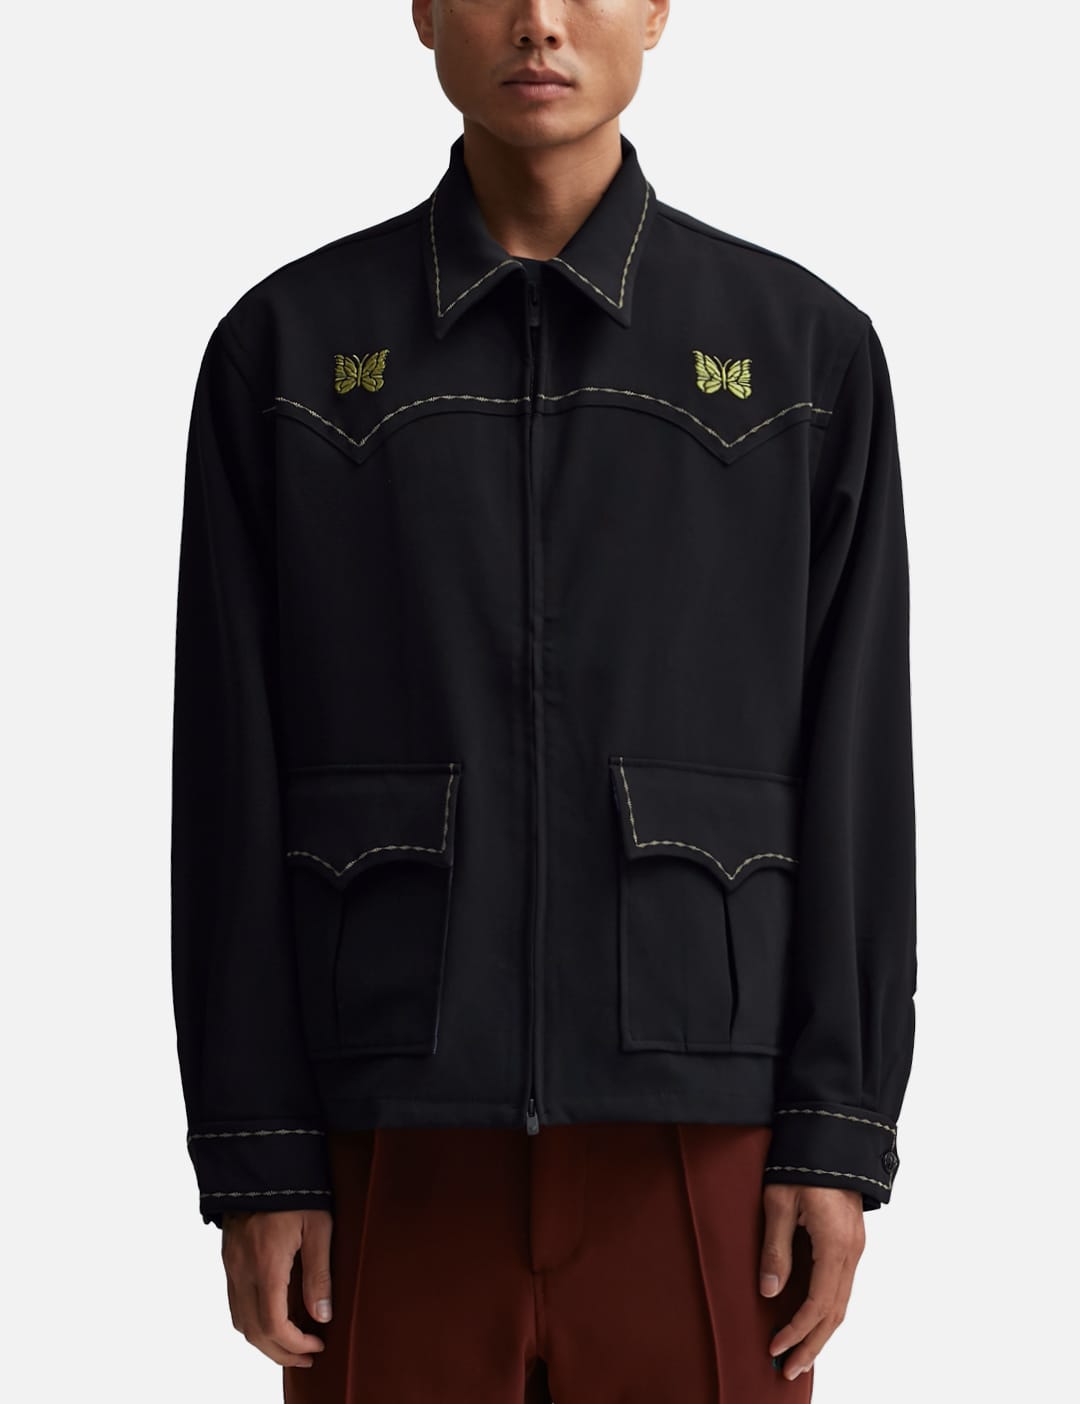 Needles - Western Sport Jacket | HBX - Globally Curated Fashion